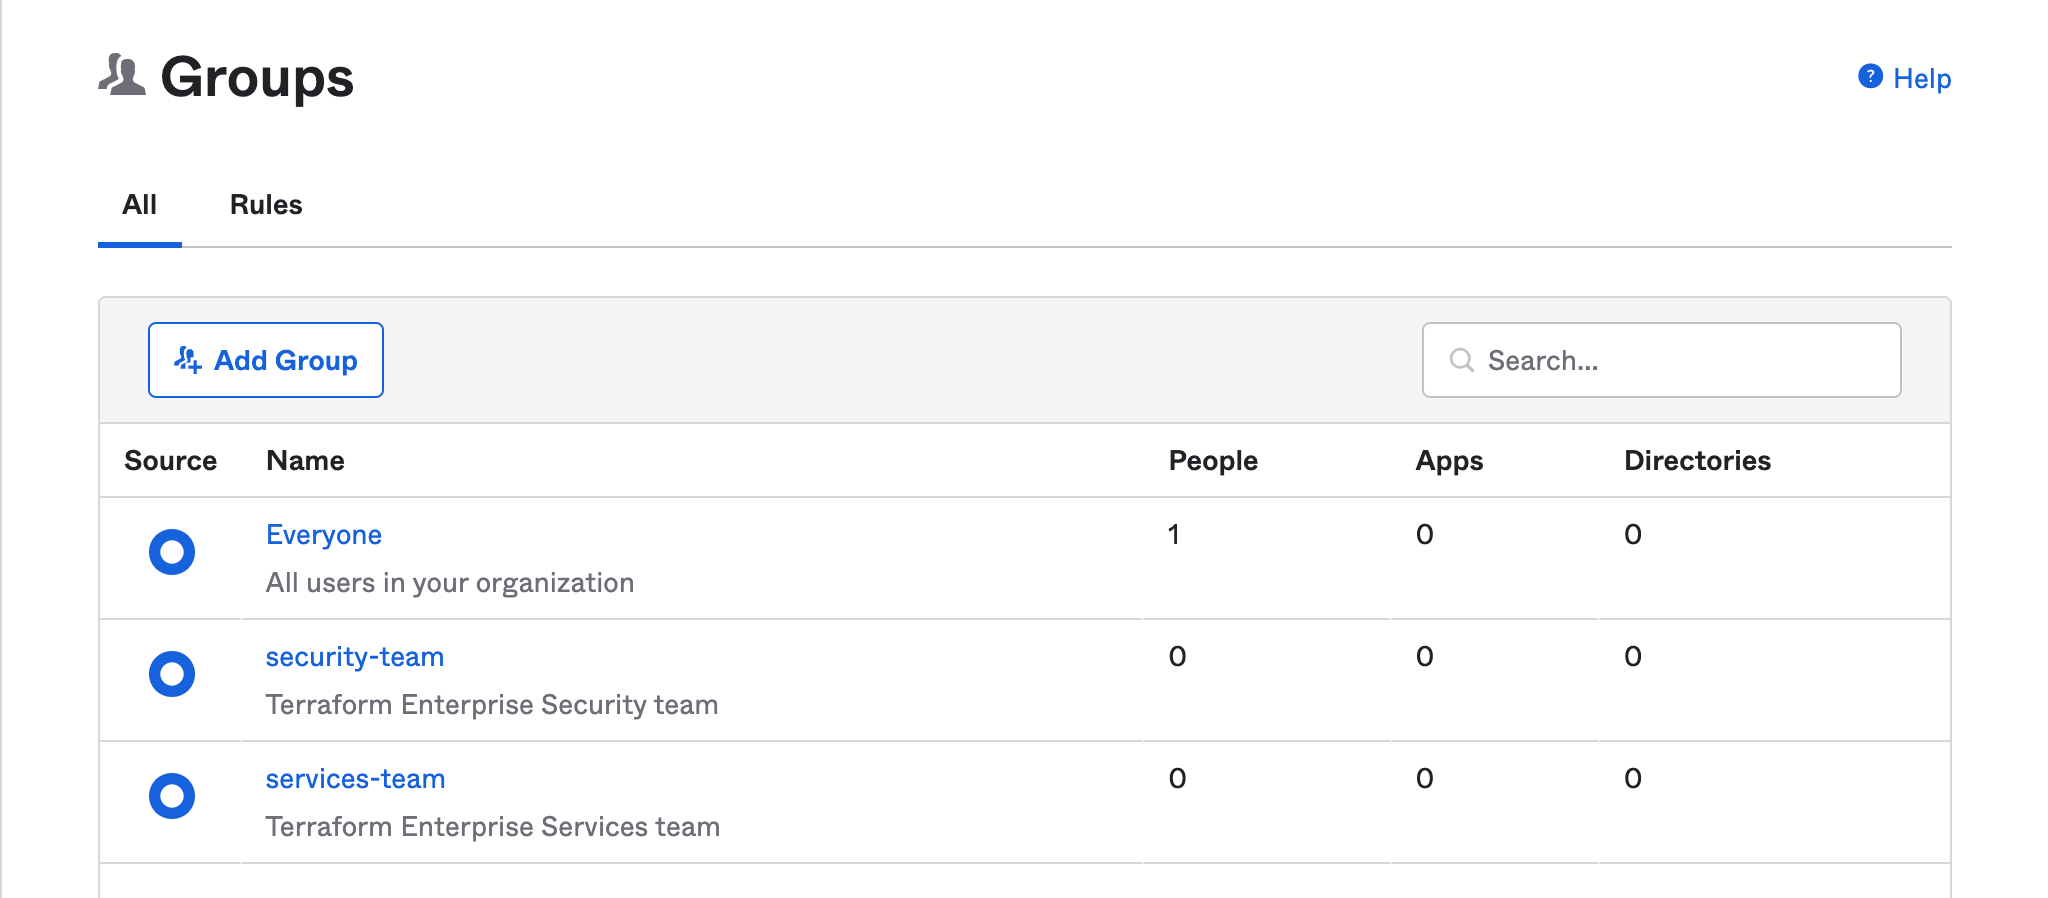 Okta dashboard now shows the two newly created teams: security-team and services-team